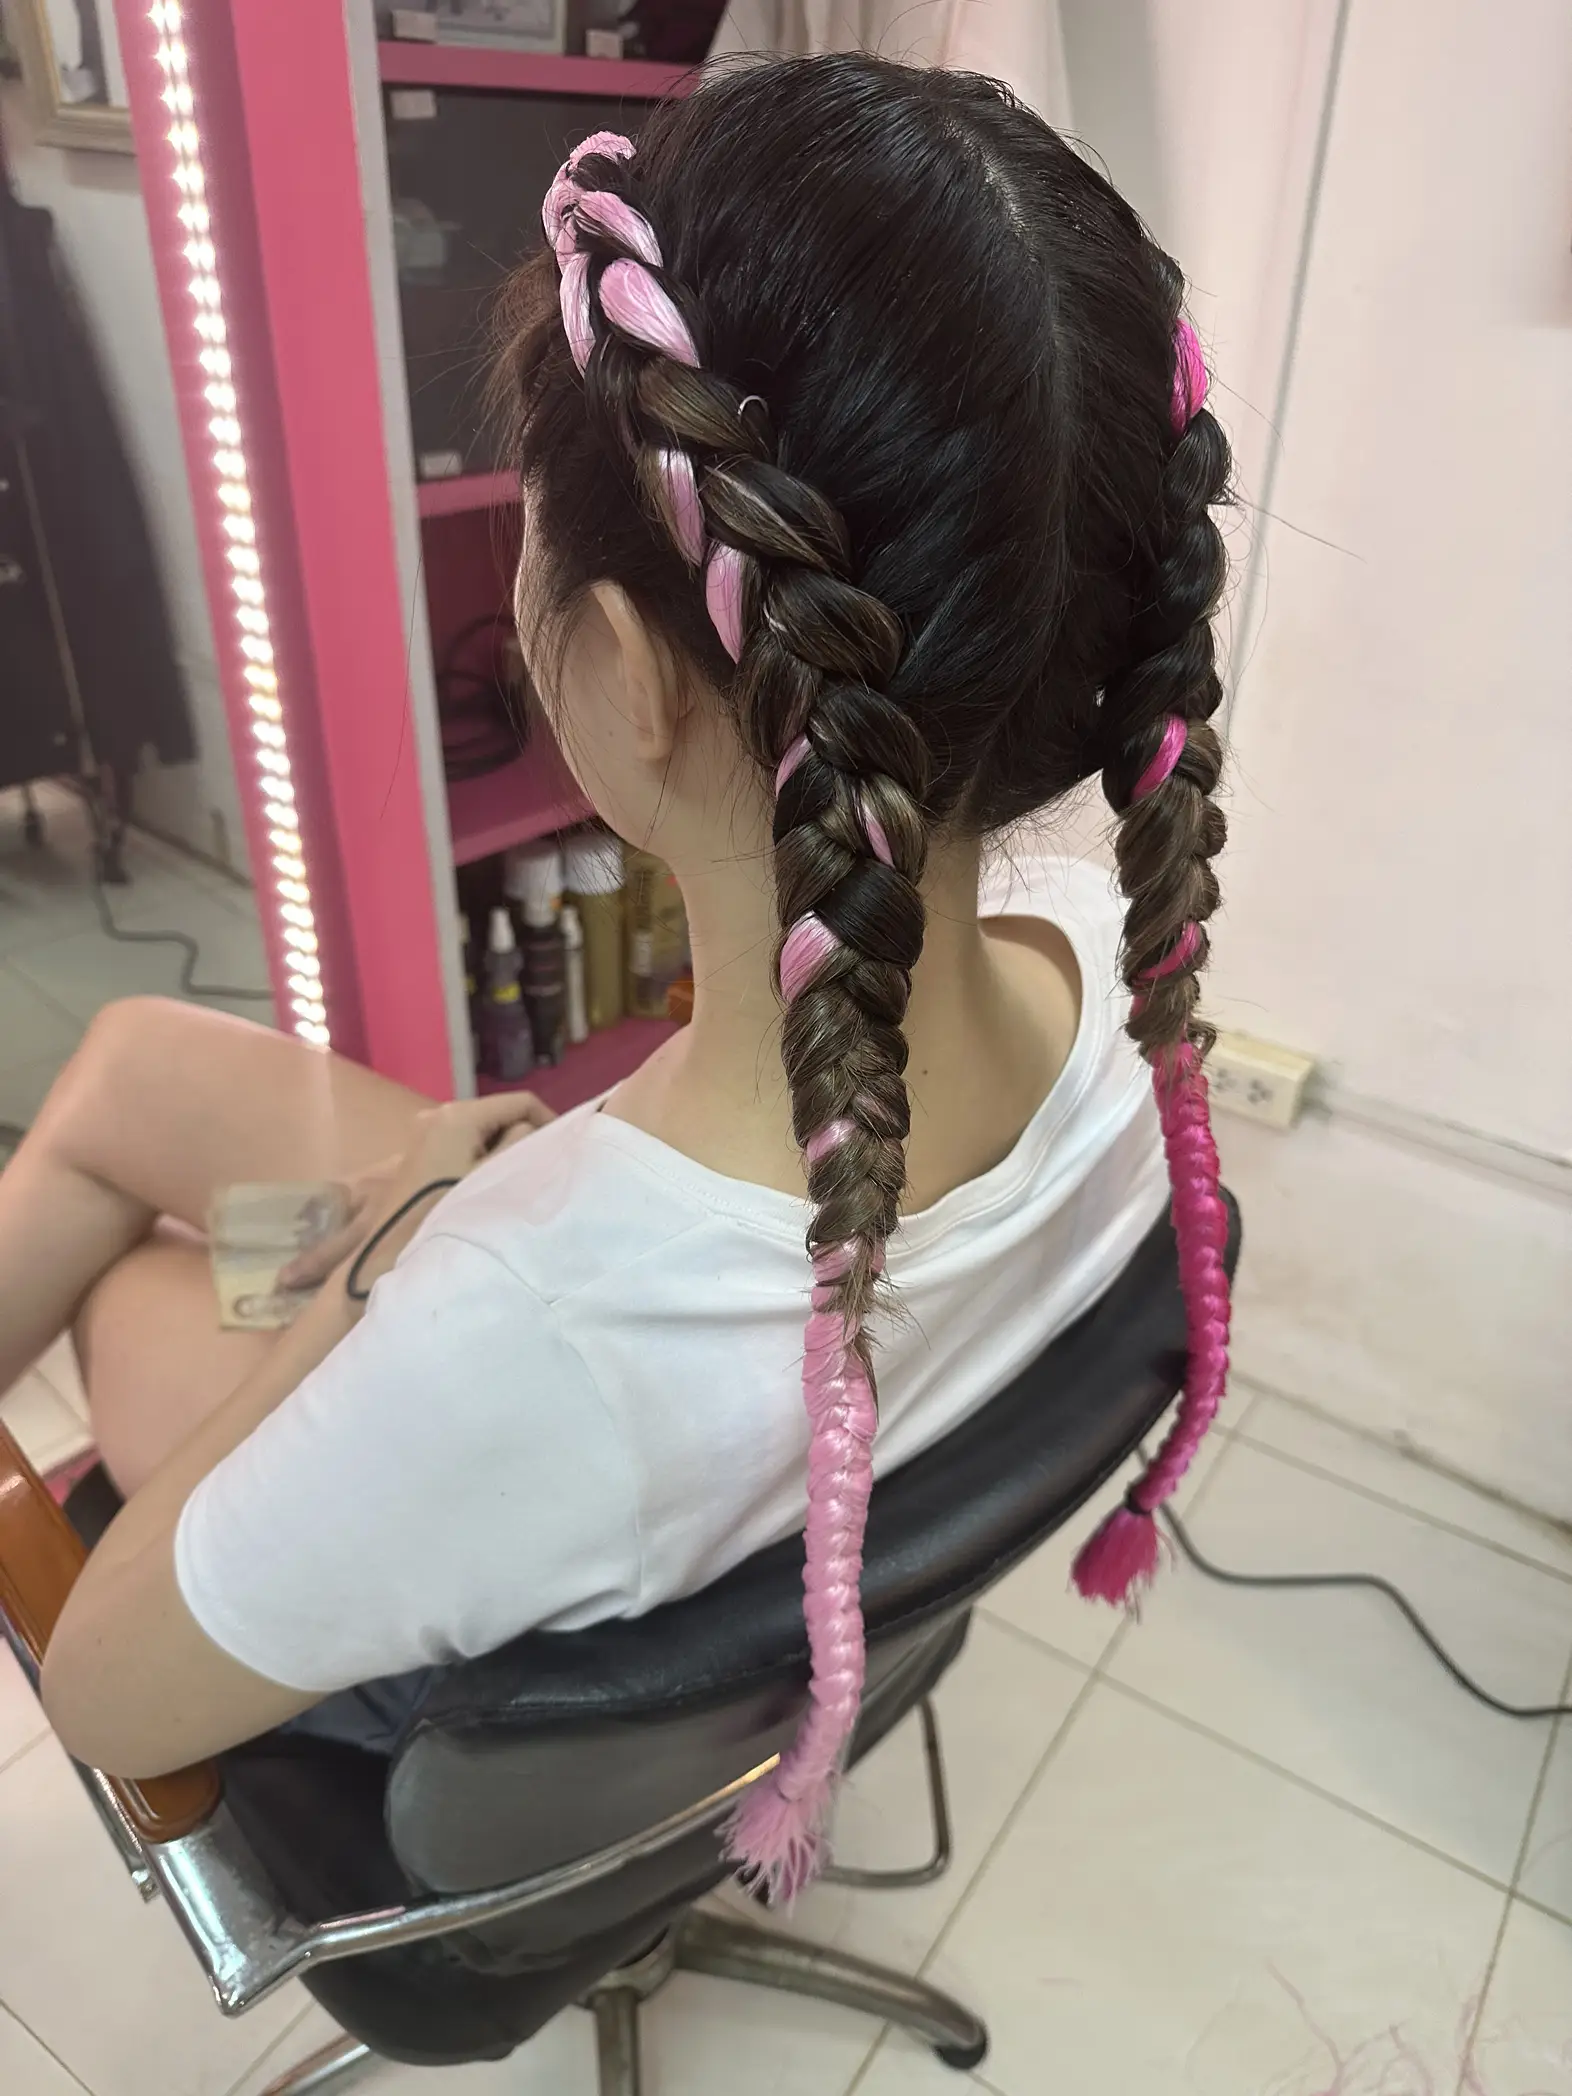 How to Braid Your Own Hair Because Salons Are Expensive